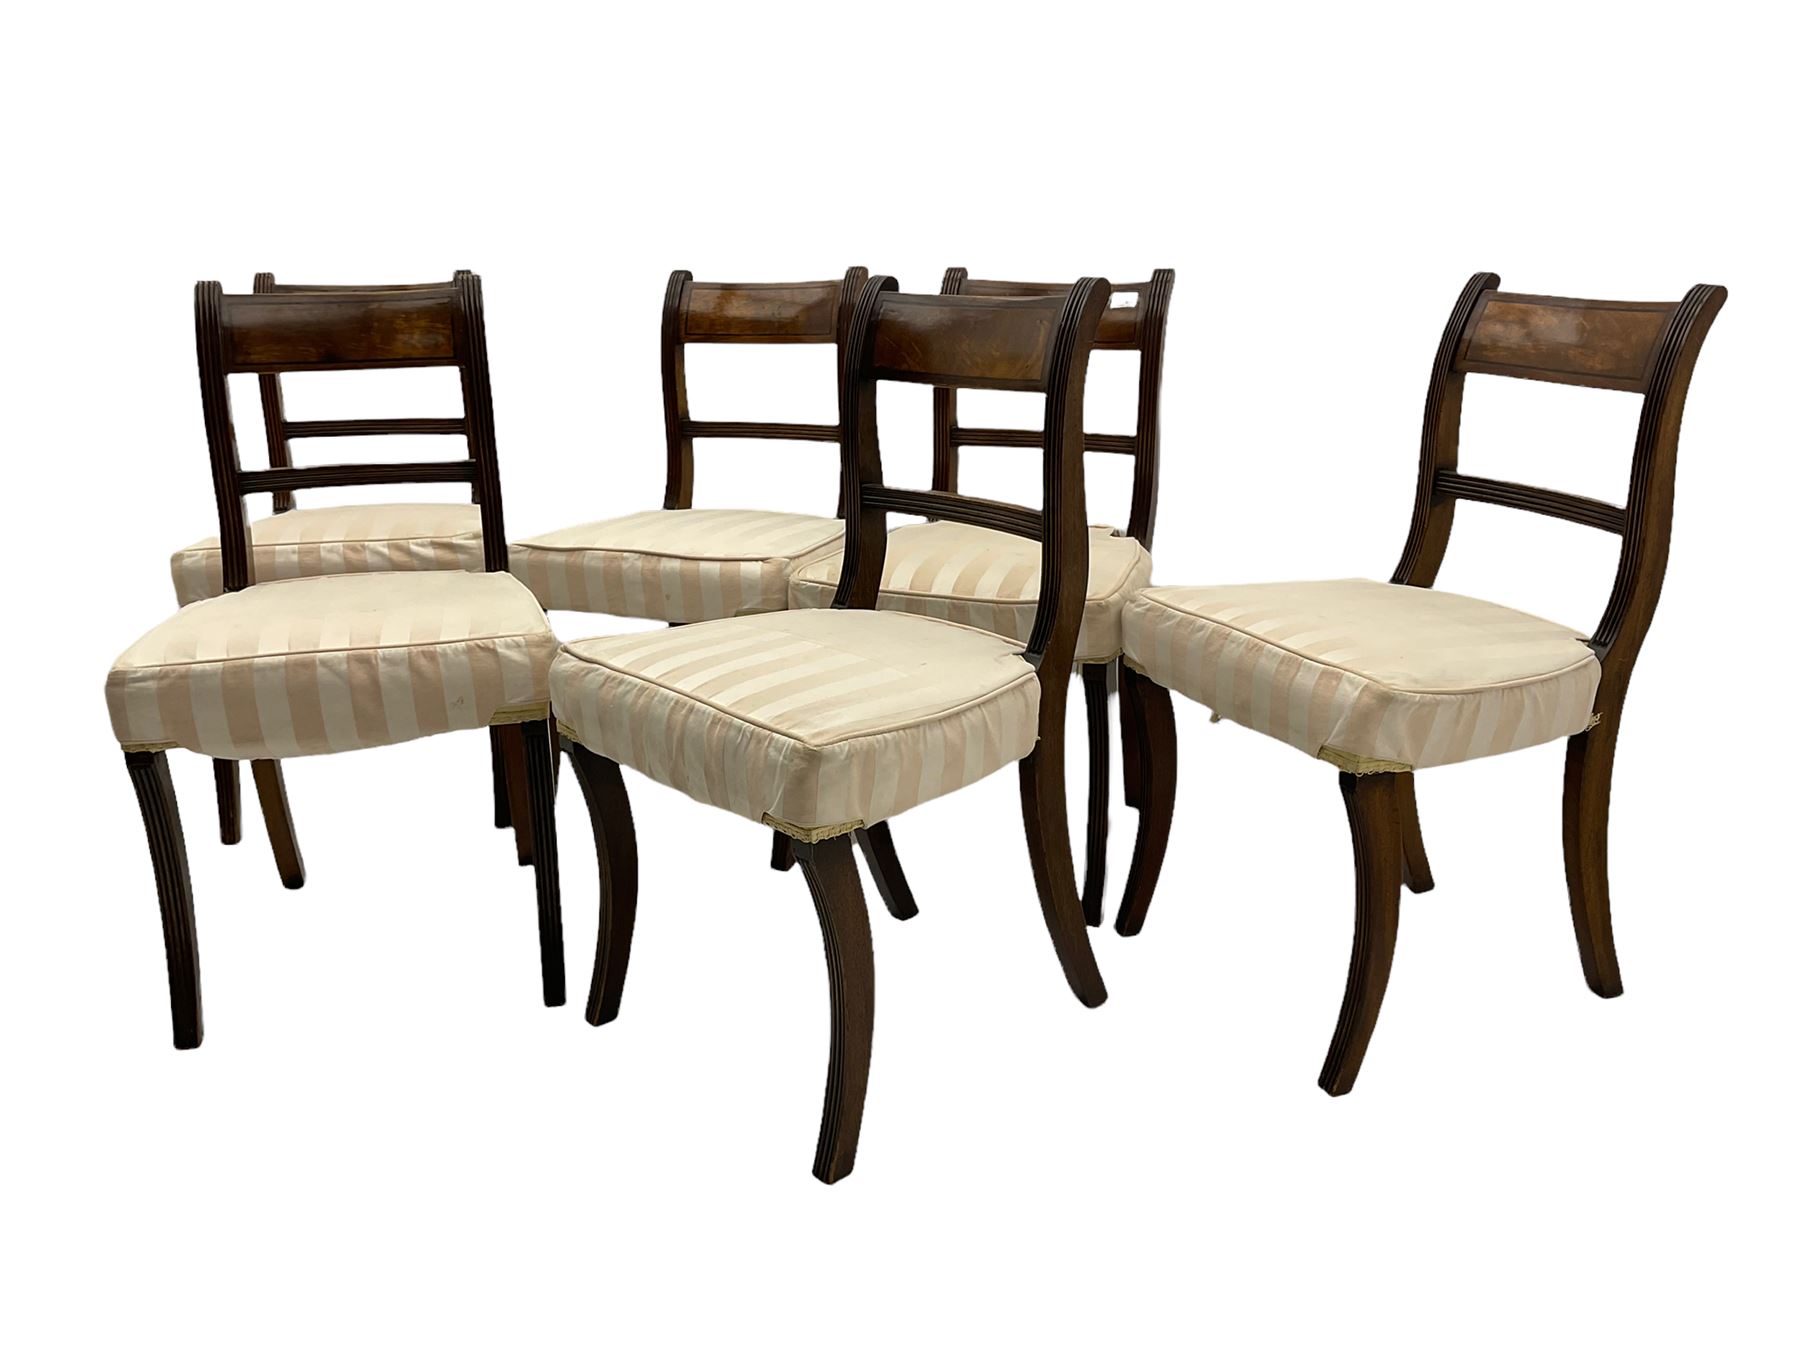 Regency period set six mahogany dining chairs - Image 4 of 5